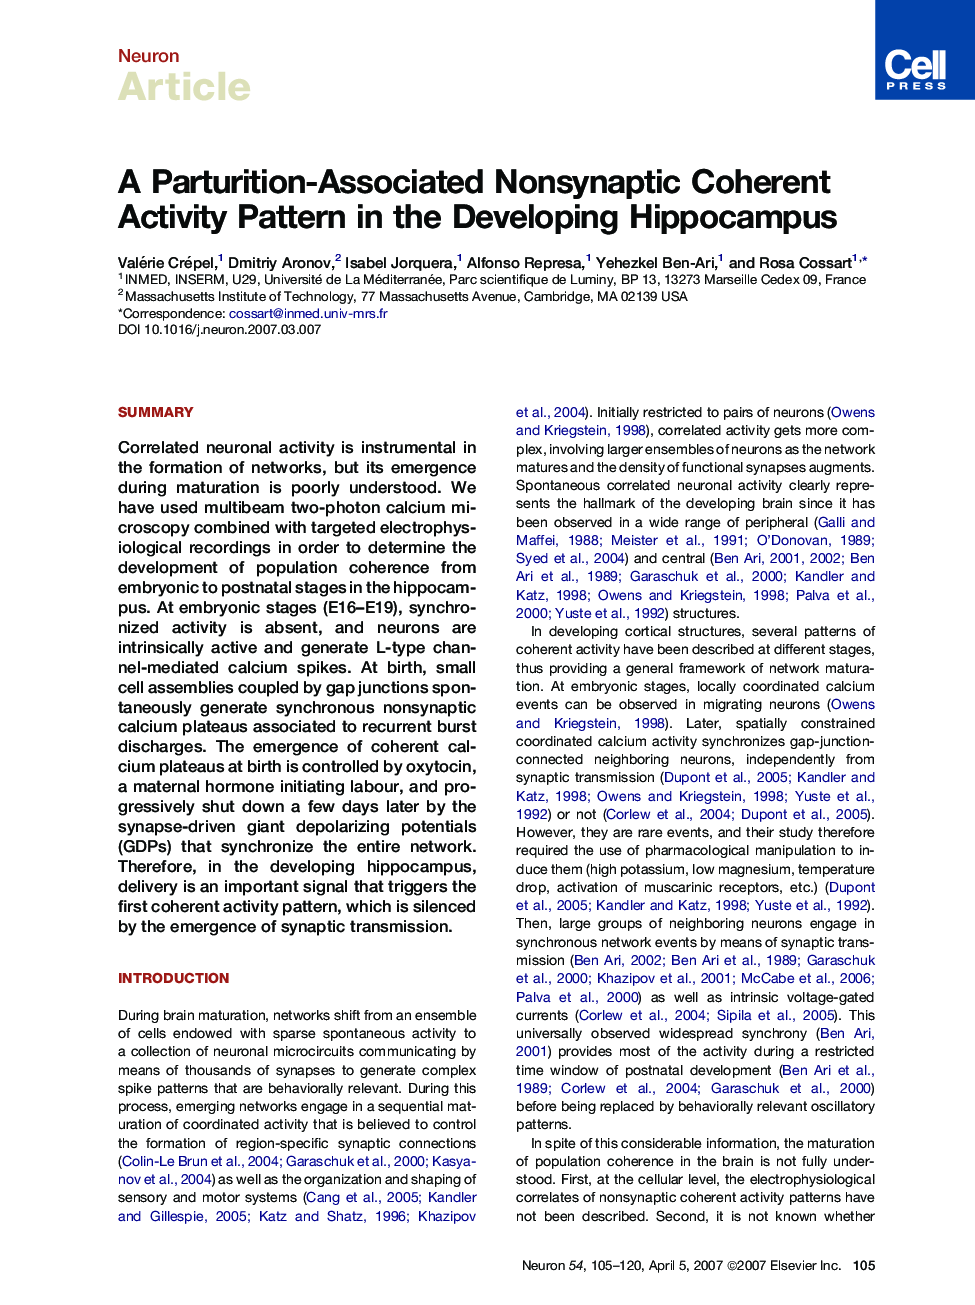 A Parturition-Associated Nonsynaptic Coherent Activity Pattern in the Developing Hippocampus